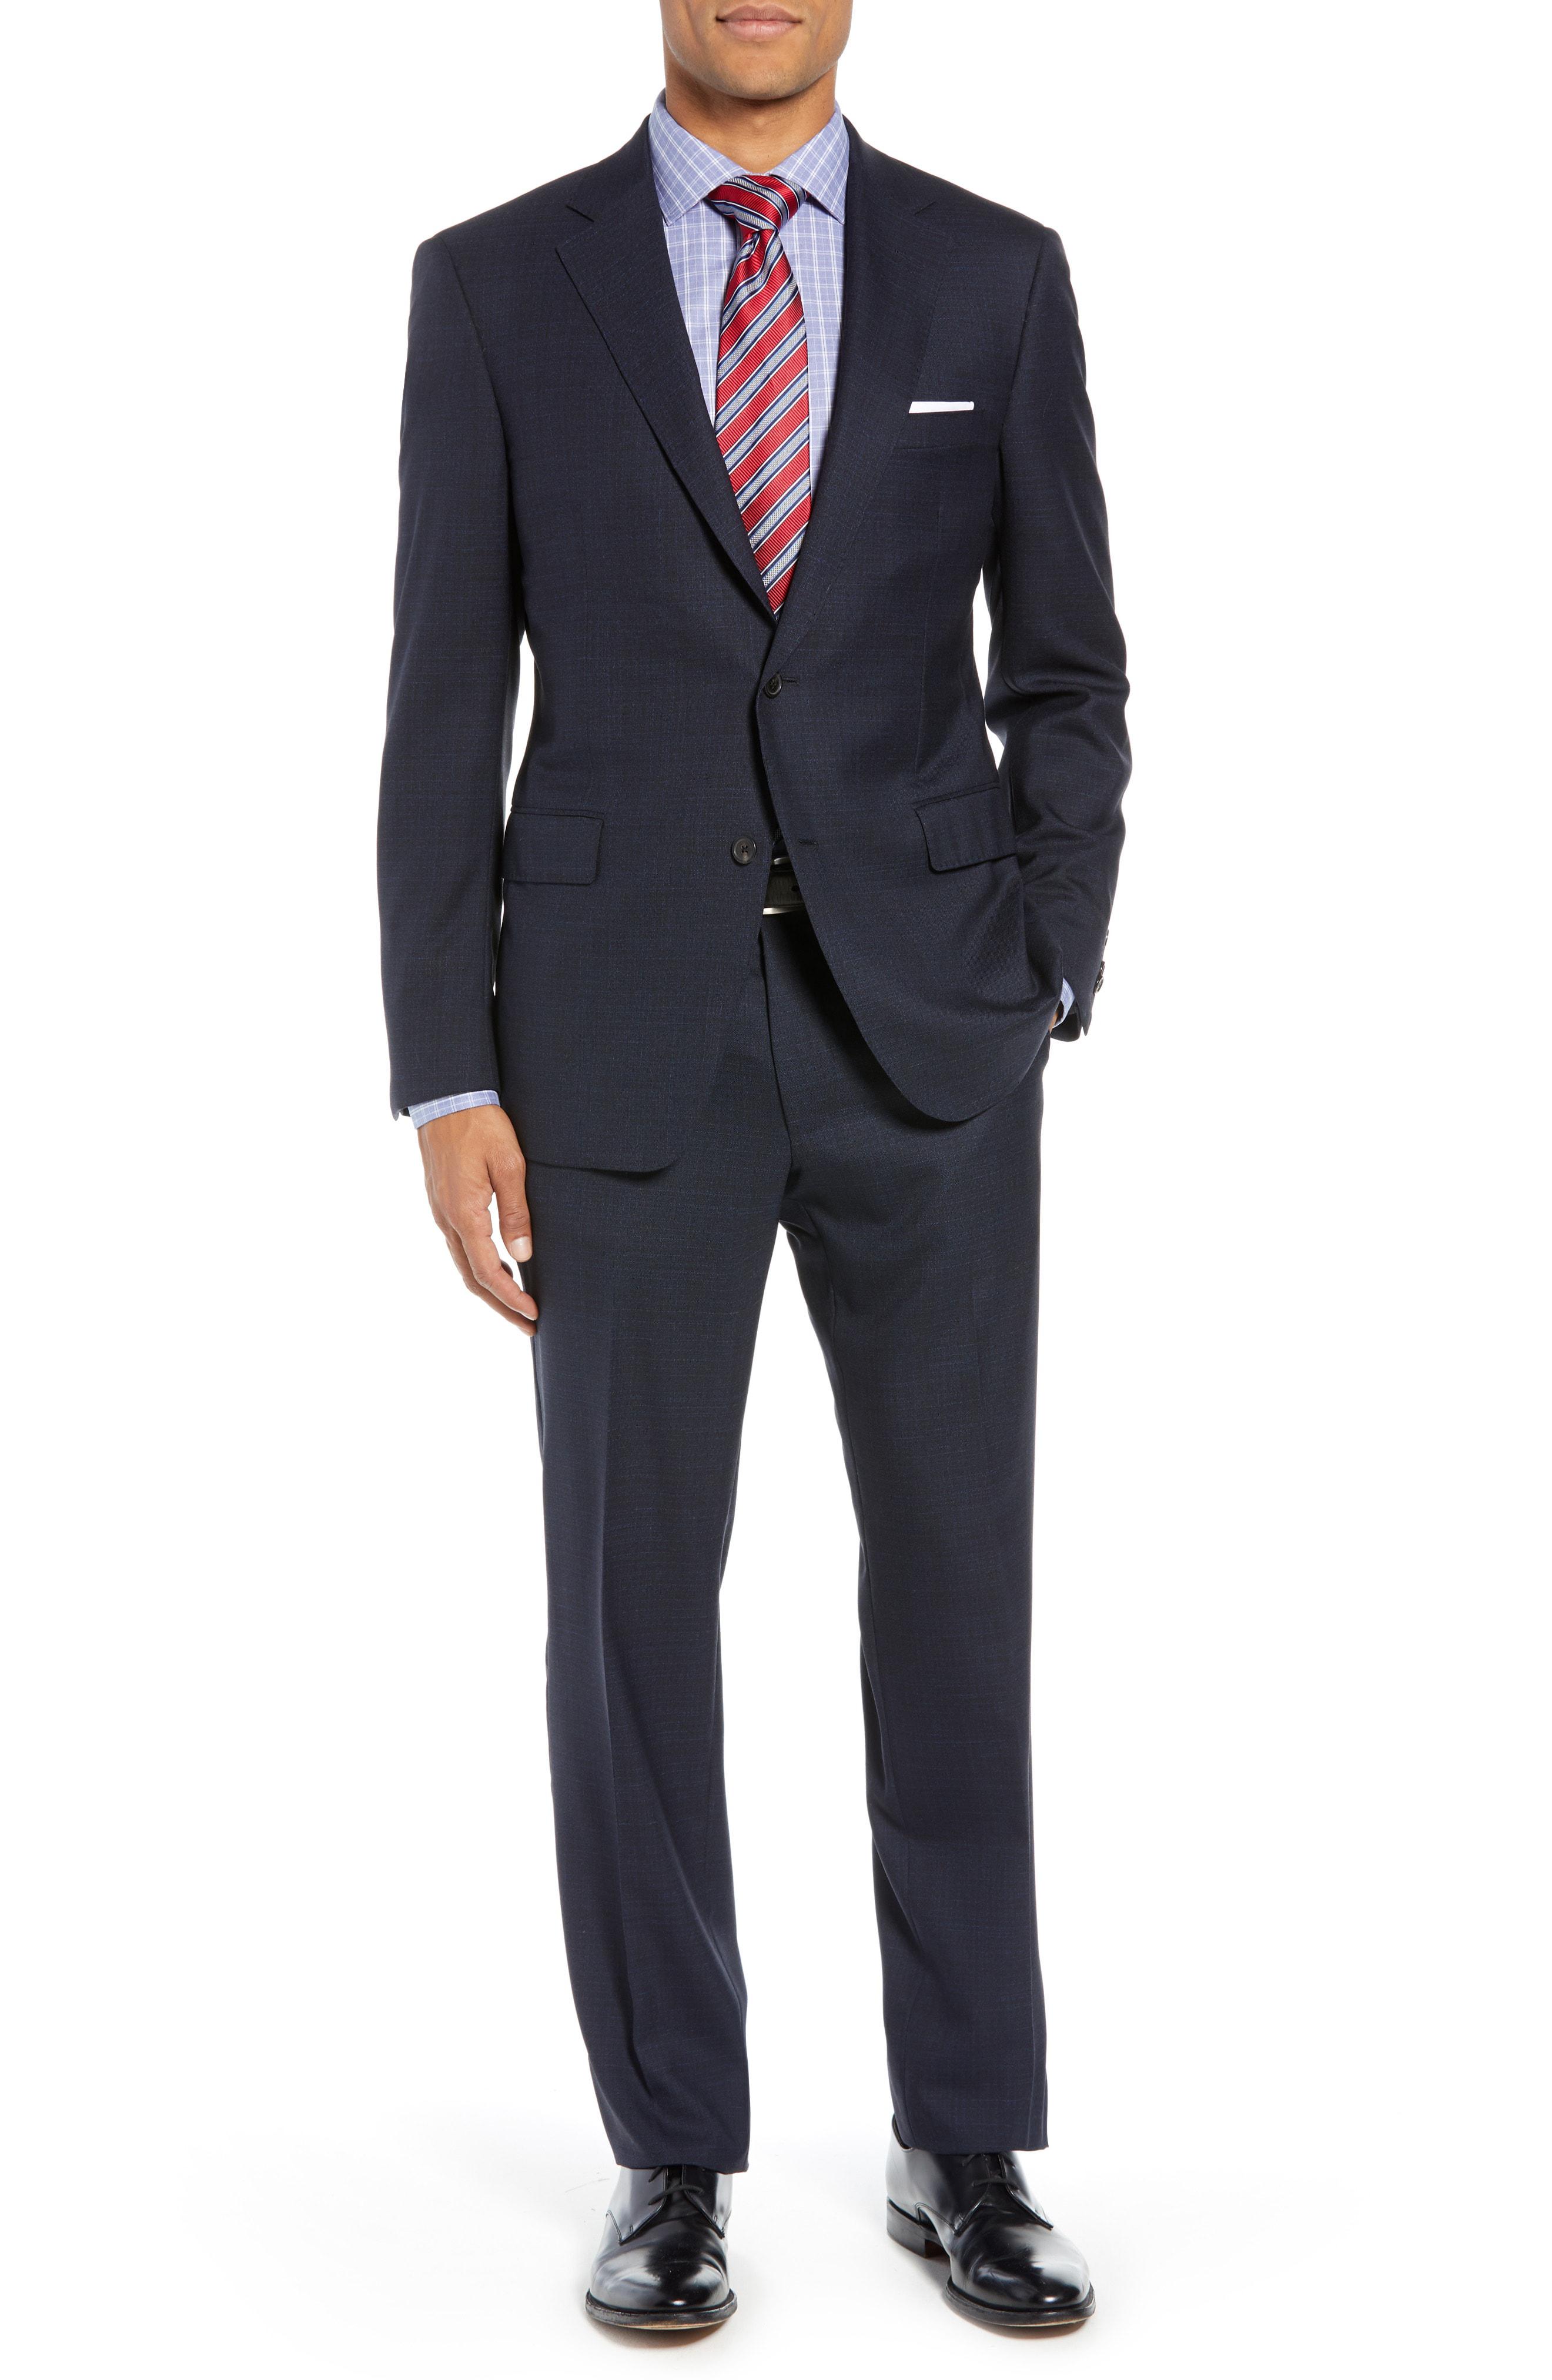 Lyst - Samuelsohn Classic Fit Solid Wool Suit in Blue for Men